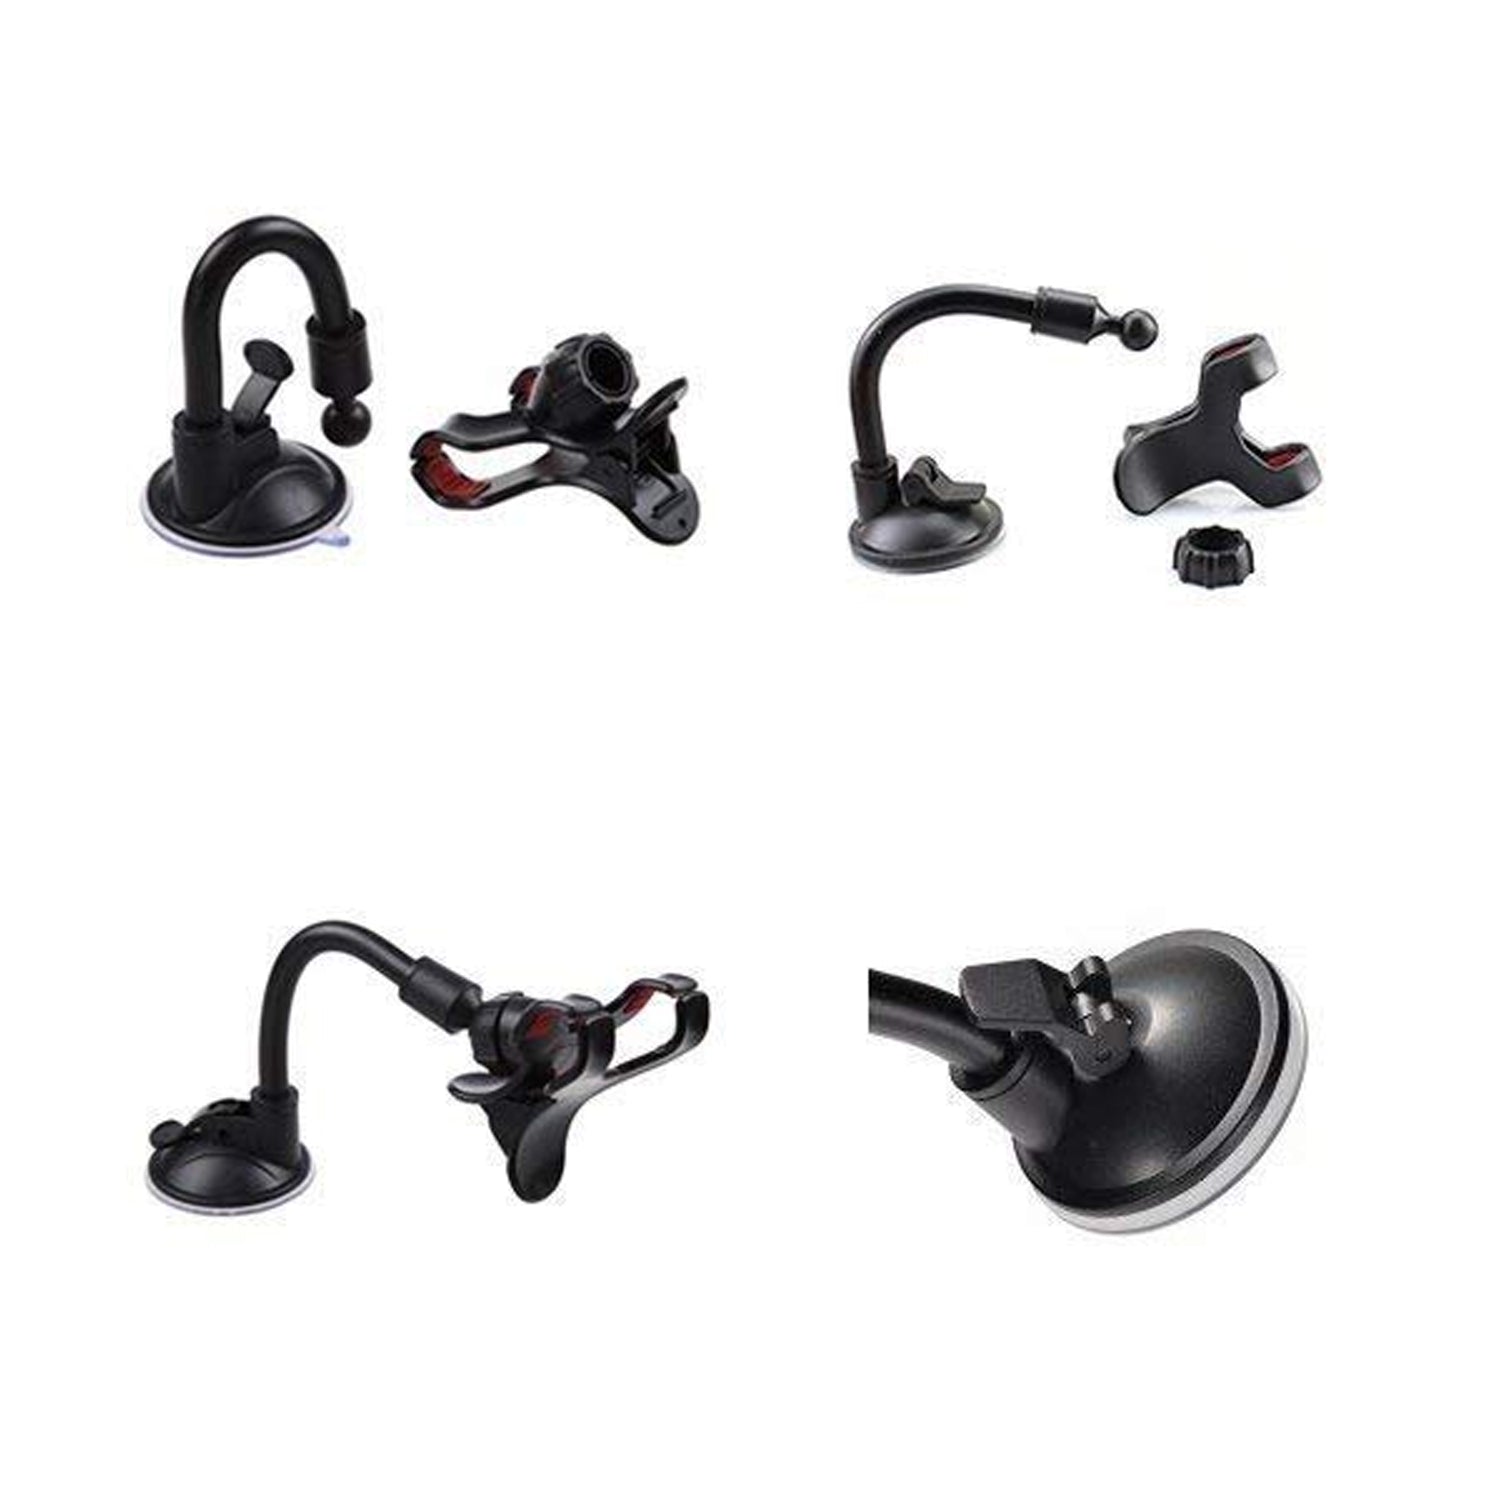 0282B Flexible Mobile Stand Multi Angle Adjustment with 360 Degree Adjustment For Car & Home Use Mobile Stand